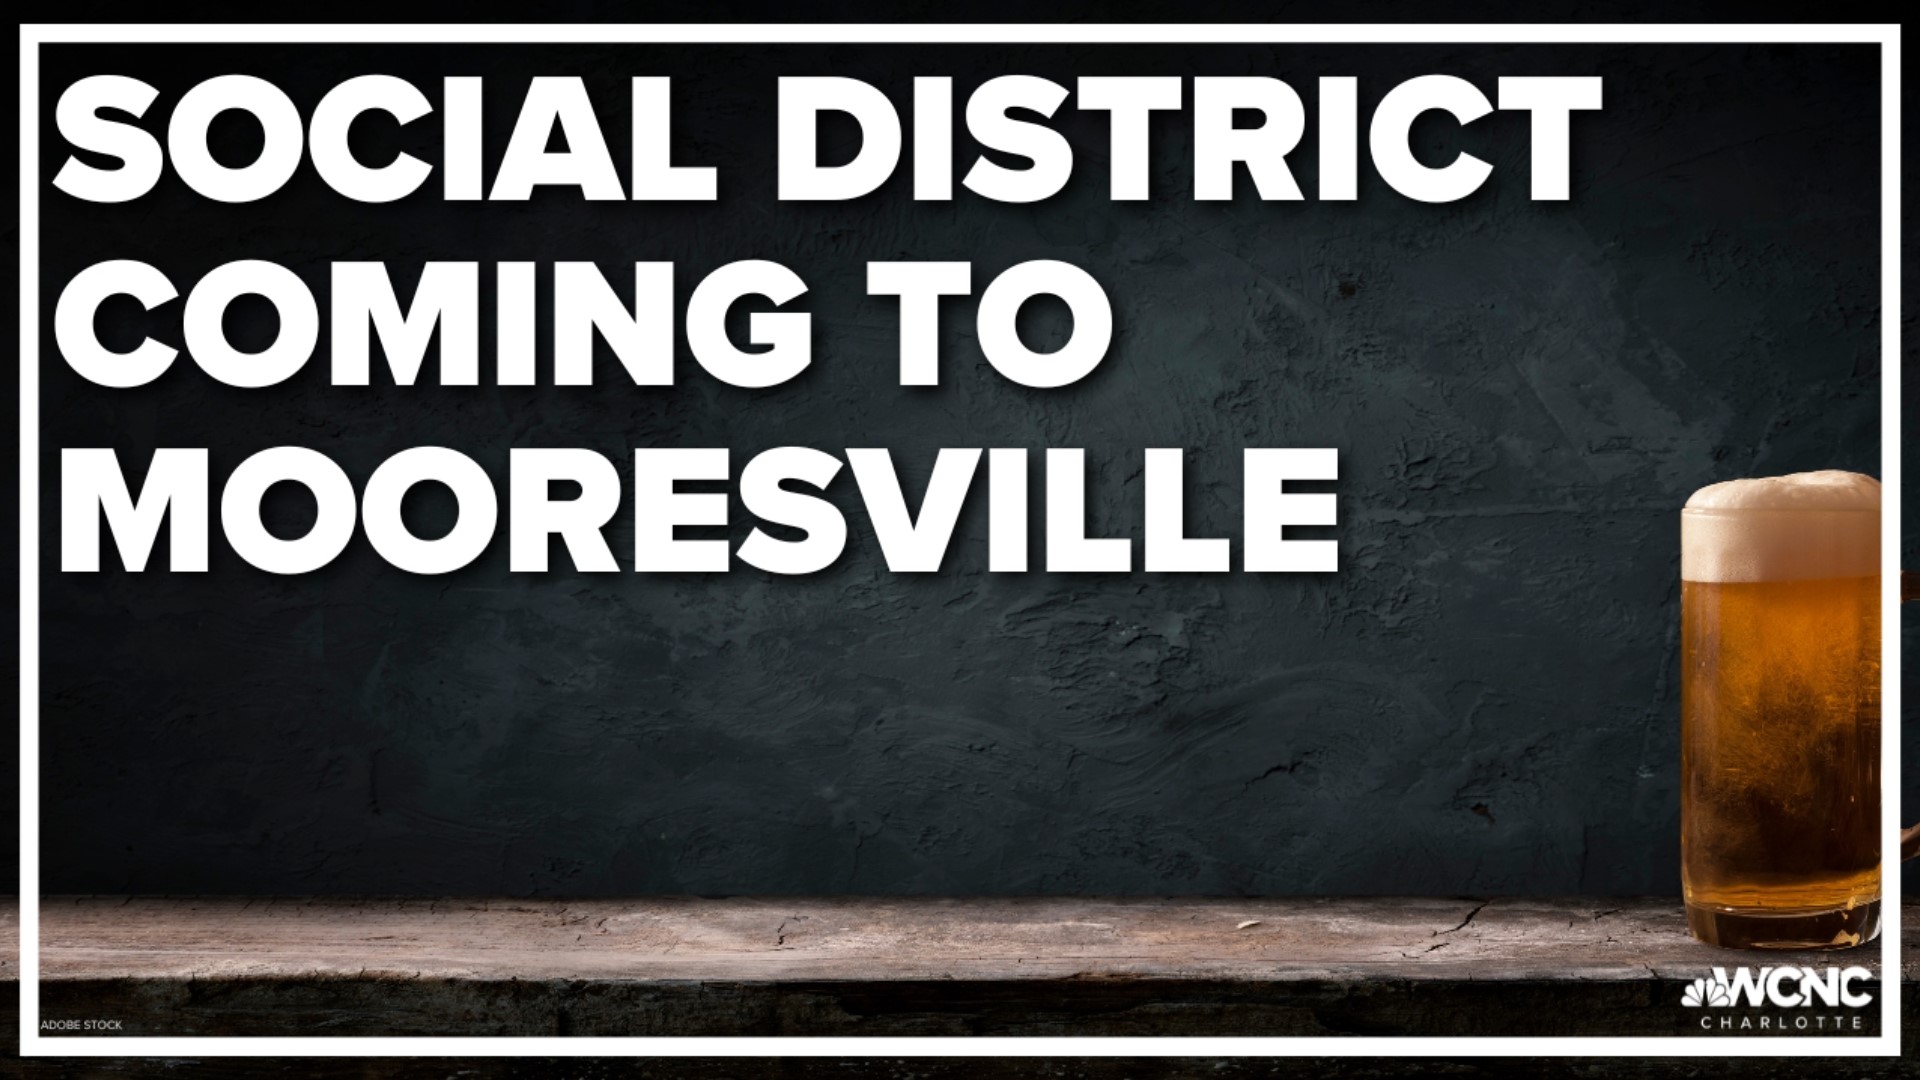 Mooresville is now the latest North Carolina town to create a social district.